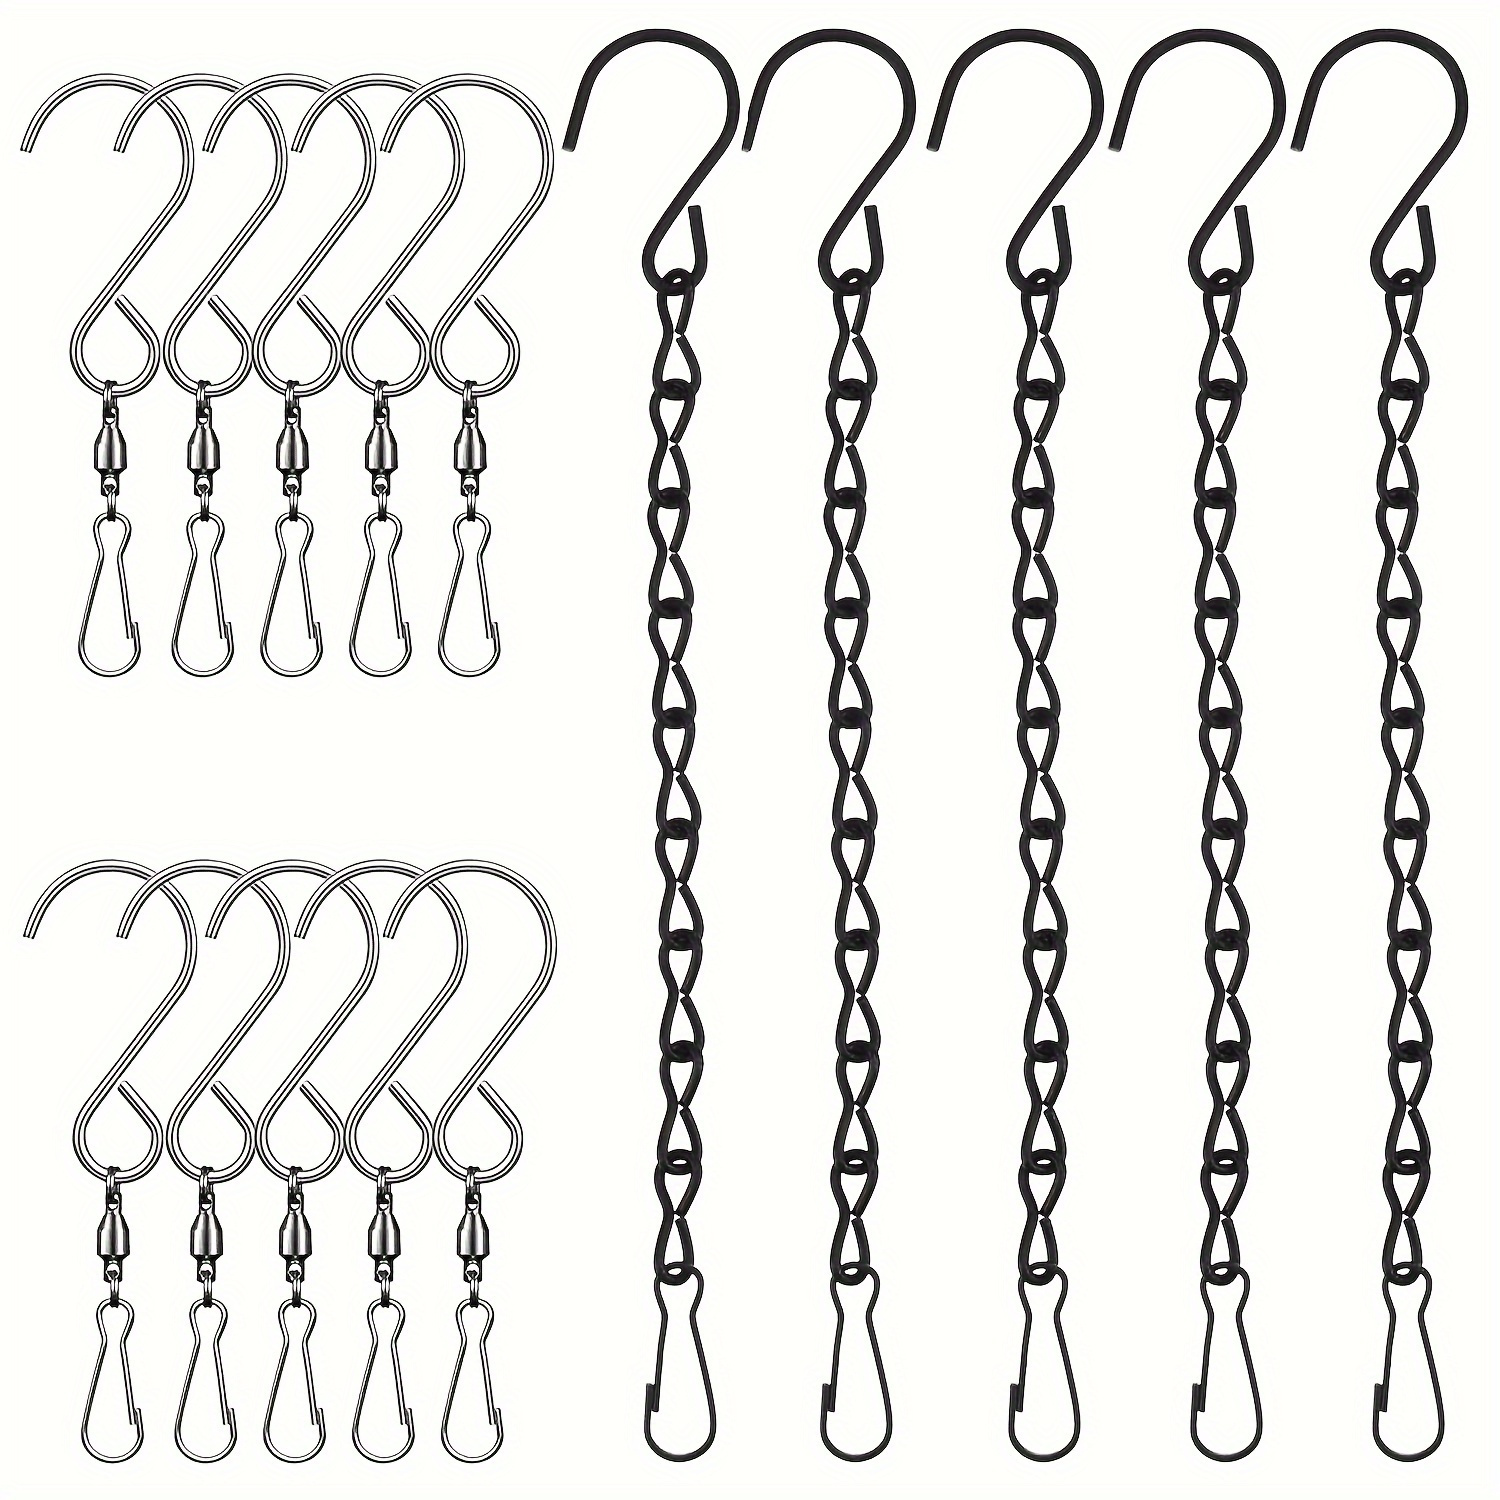 

10pcs Rotating Hooks - Perfect For Wind Chimes, Chain Plates, Blackboard Flower Pots, Bird Feeders & Crystal Spiral Propeller Party Supplies (9.5 Inches)